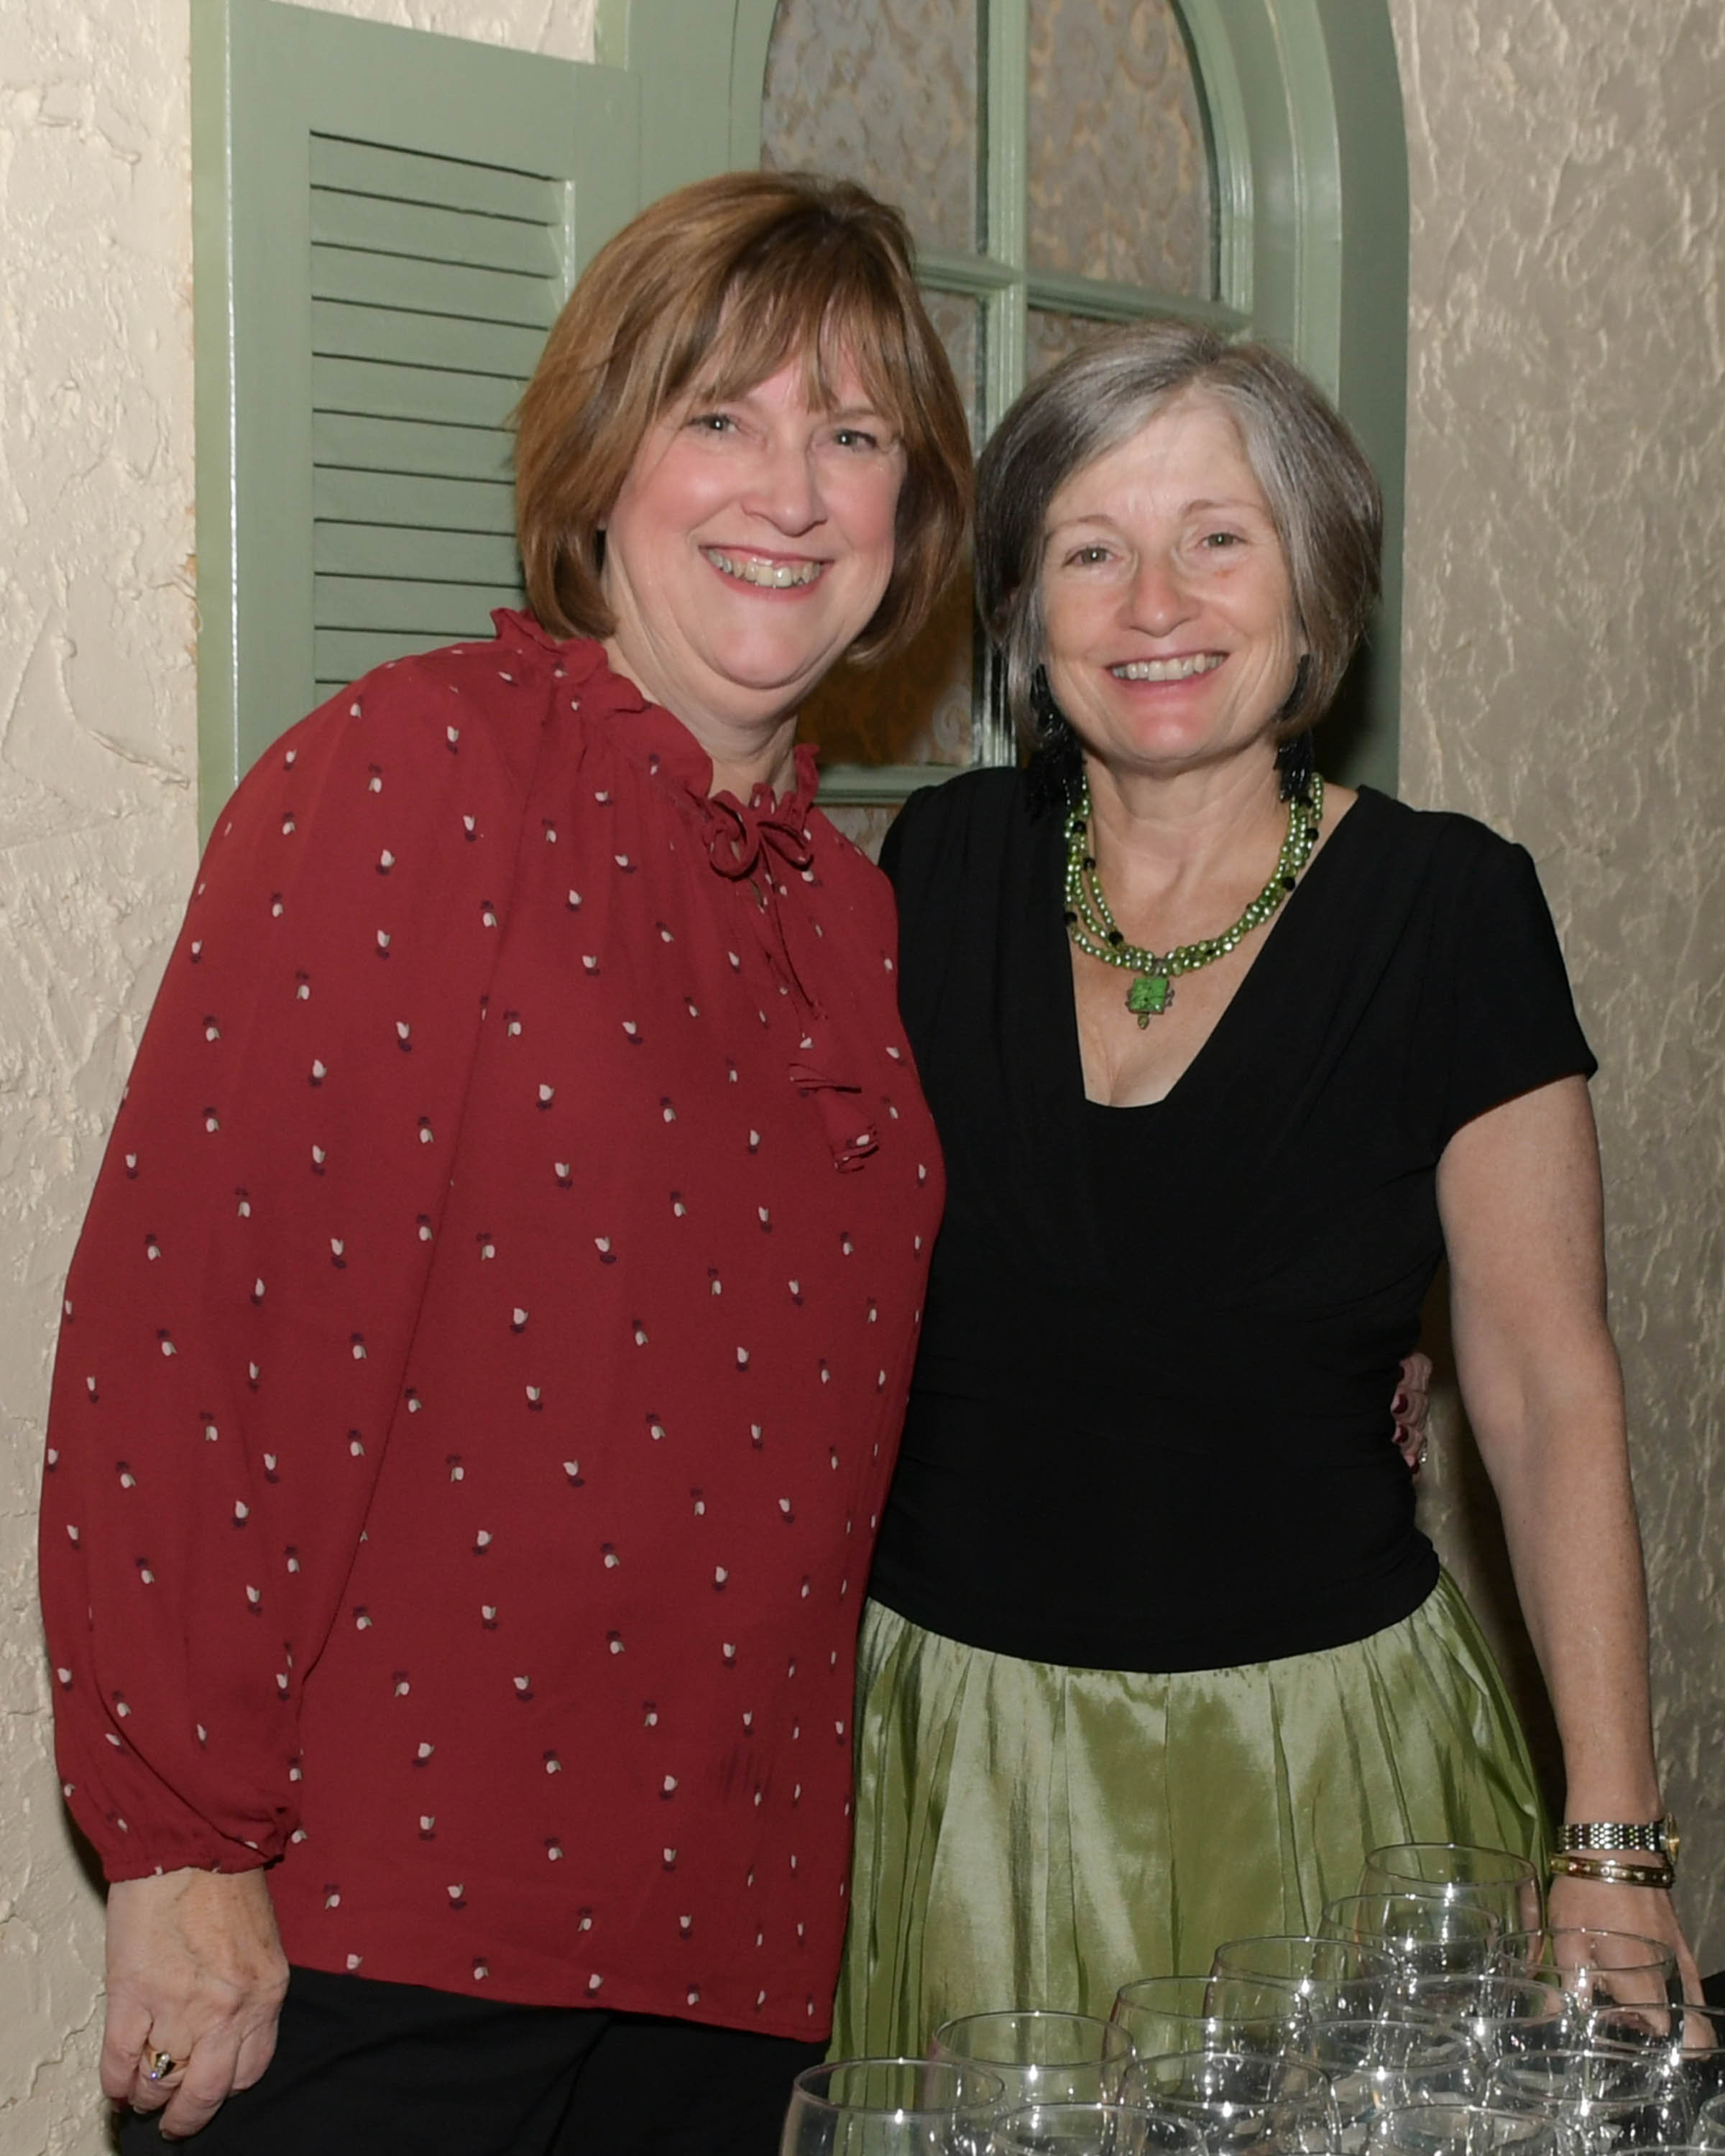 Vin Le Soir to benefit AIM Services, Inc. two happy women at event